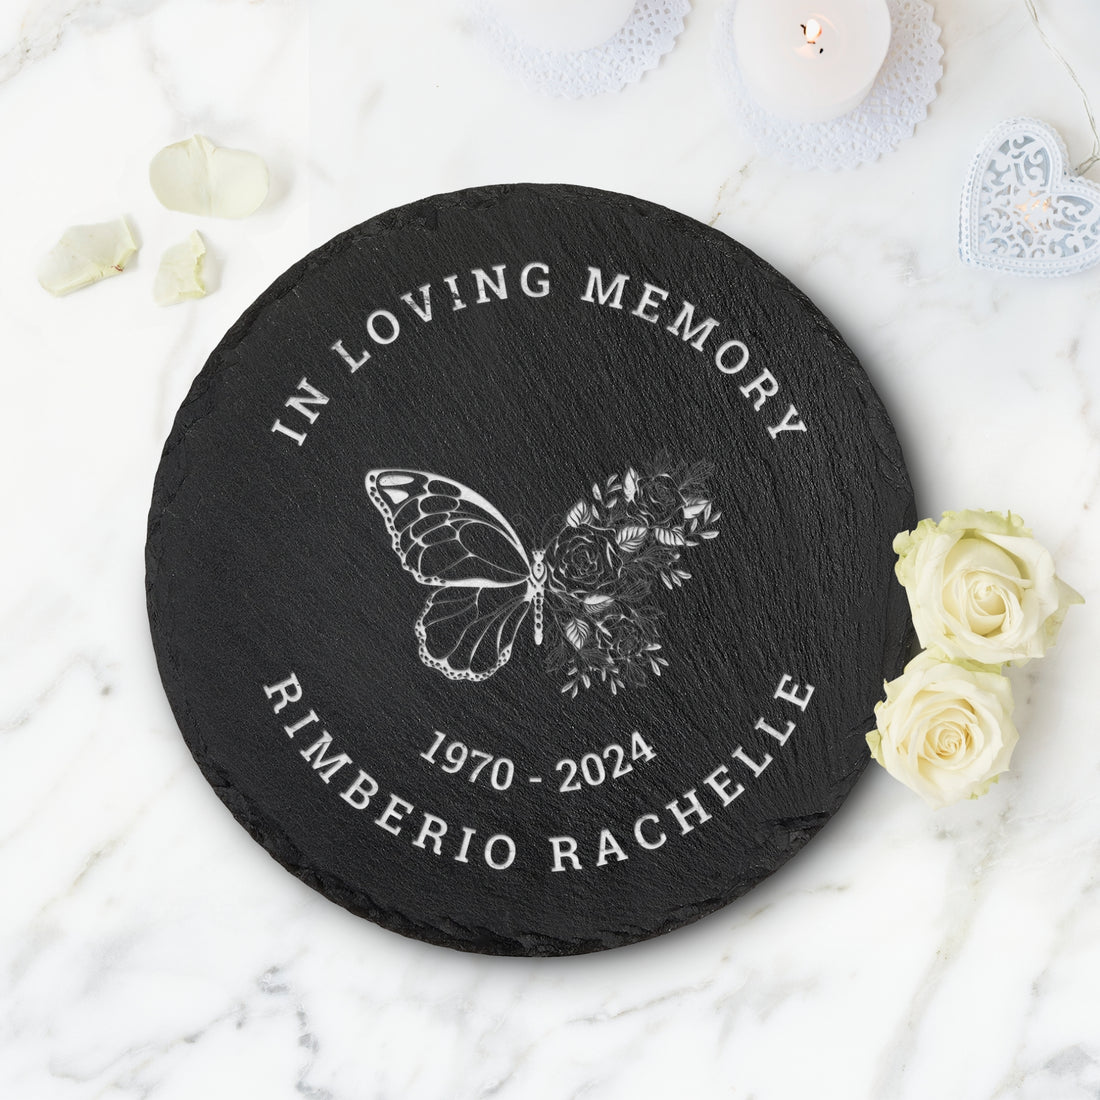 Personalised Memorial Round Slate Sign, Custom Engraved In Loving Memory Garden Stone, Funeral Cemetery Plaque, Loss of Loved One Pray Gift